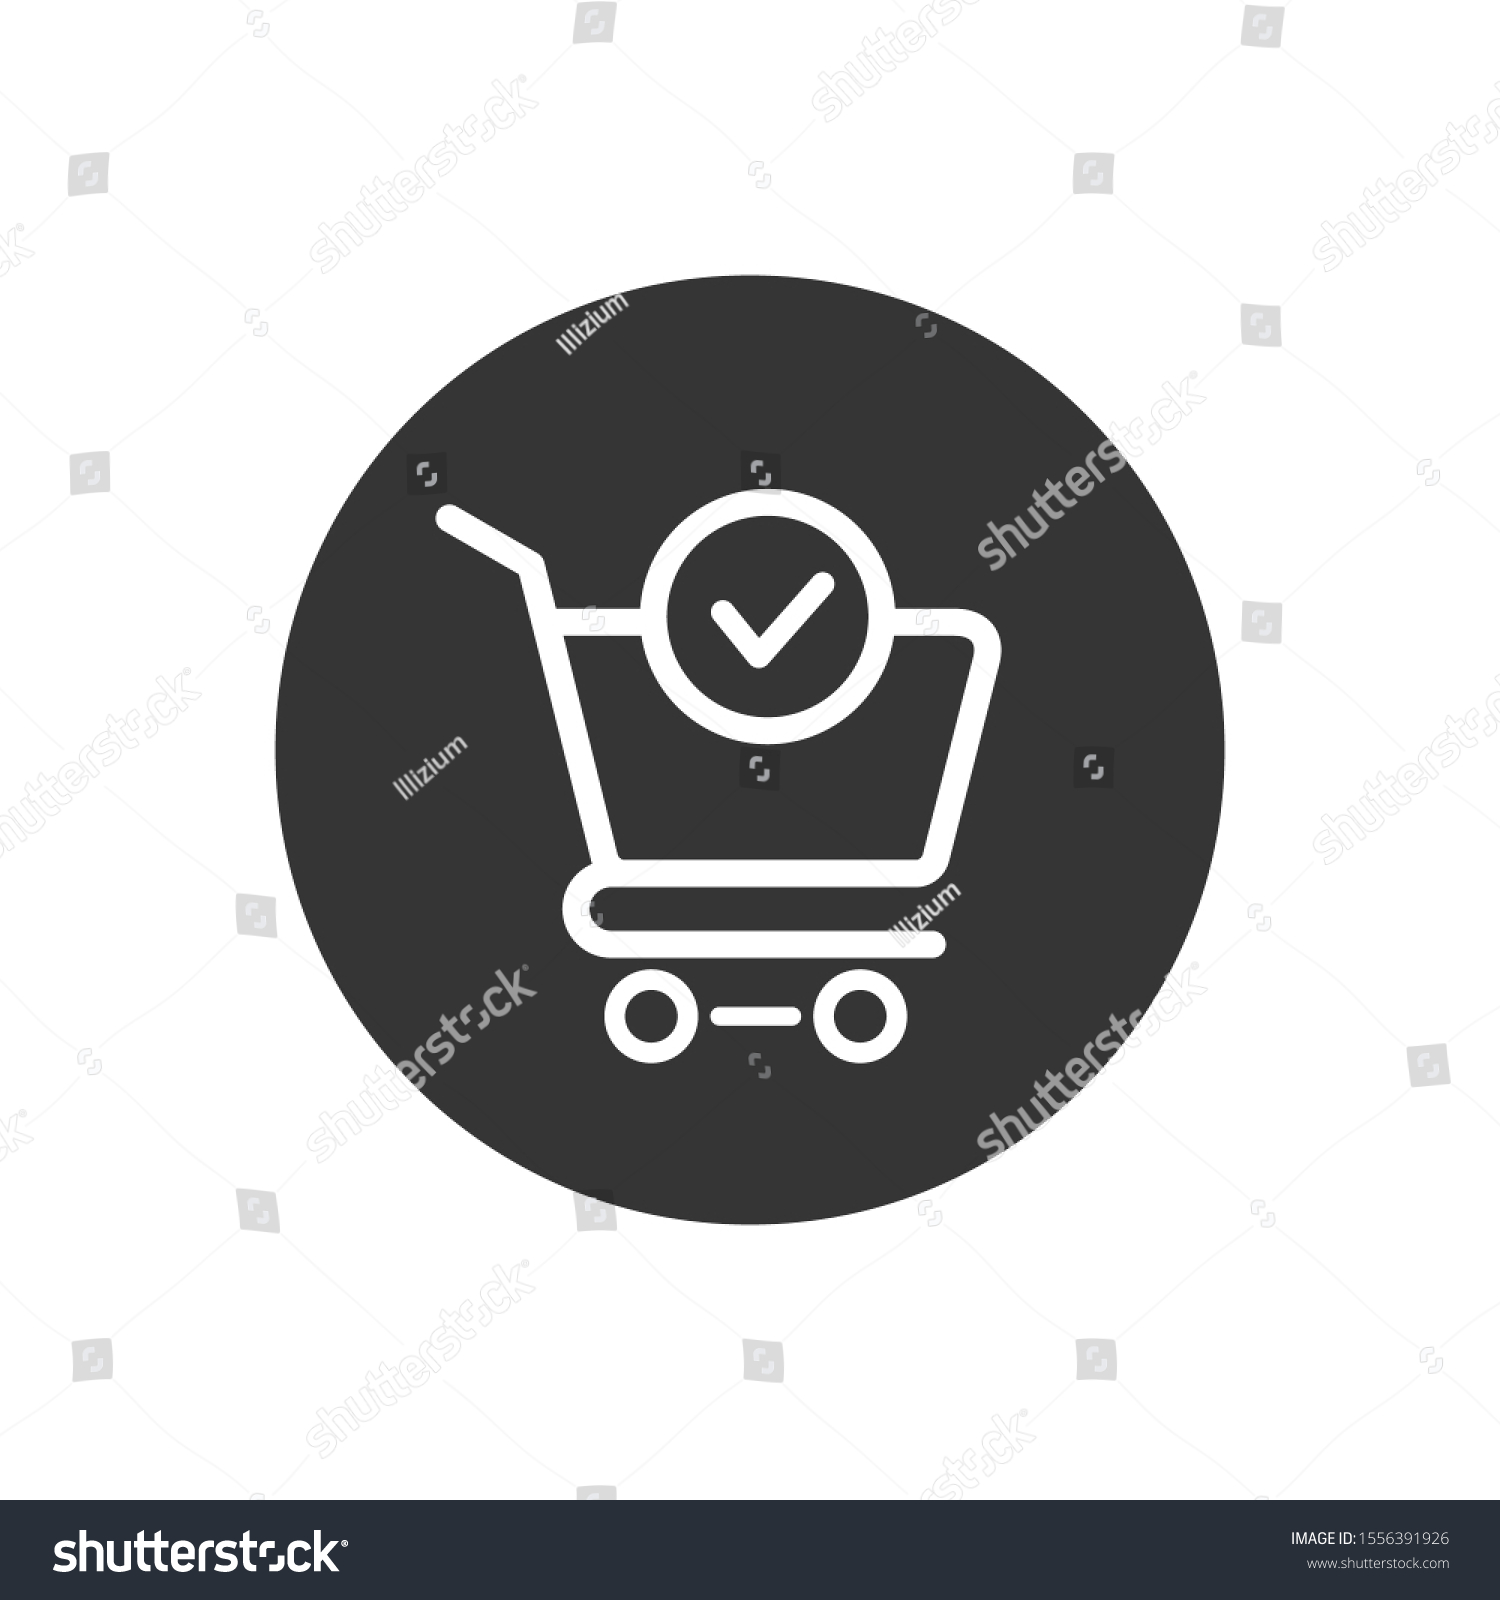 SVG of Shopping cart and check mark icon vector completed order, confirm flat sign symbols logo illustration isolated. Concept design art for business and online Marketing svg